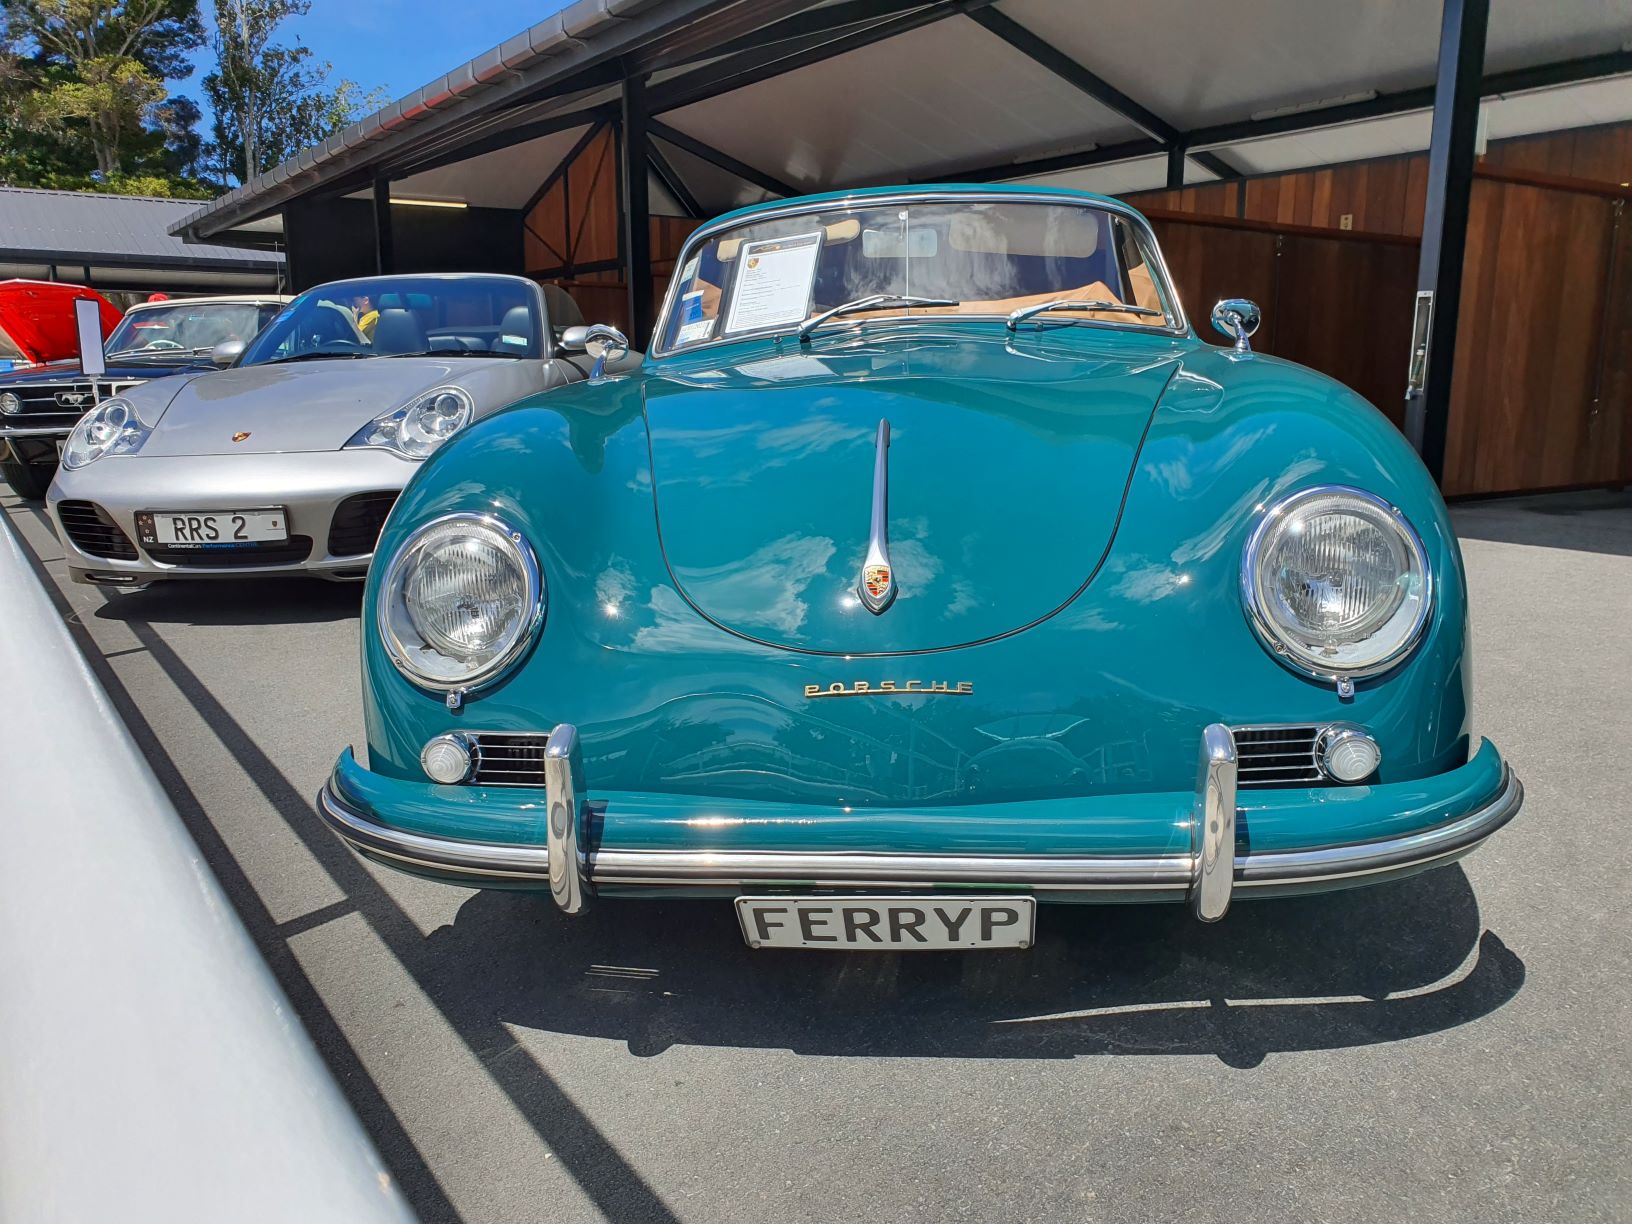 Two Porsches including a turquoise 356A Spider